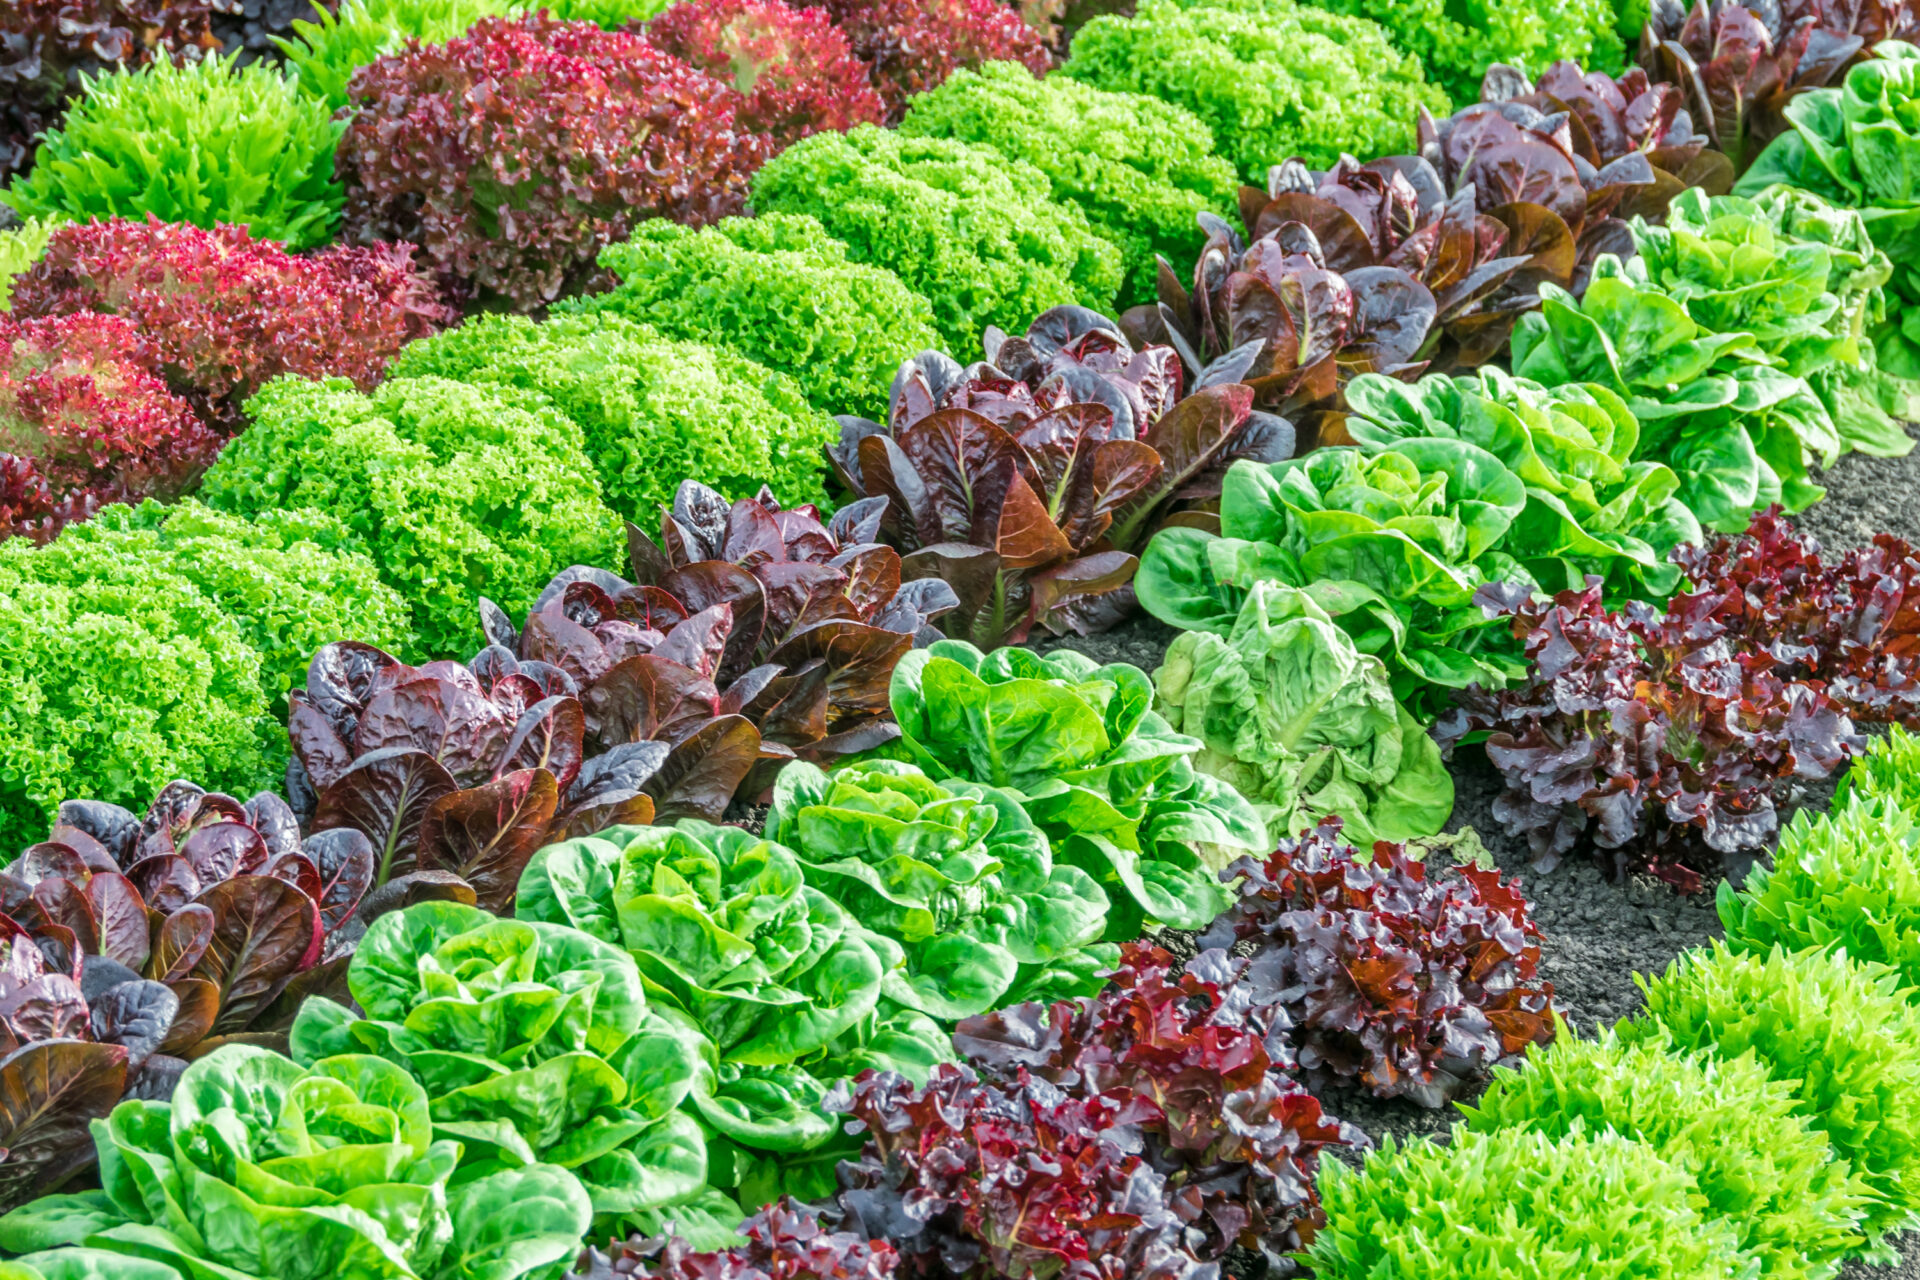 rows of colorful lettuce